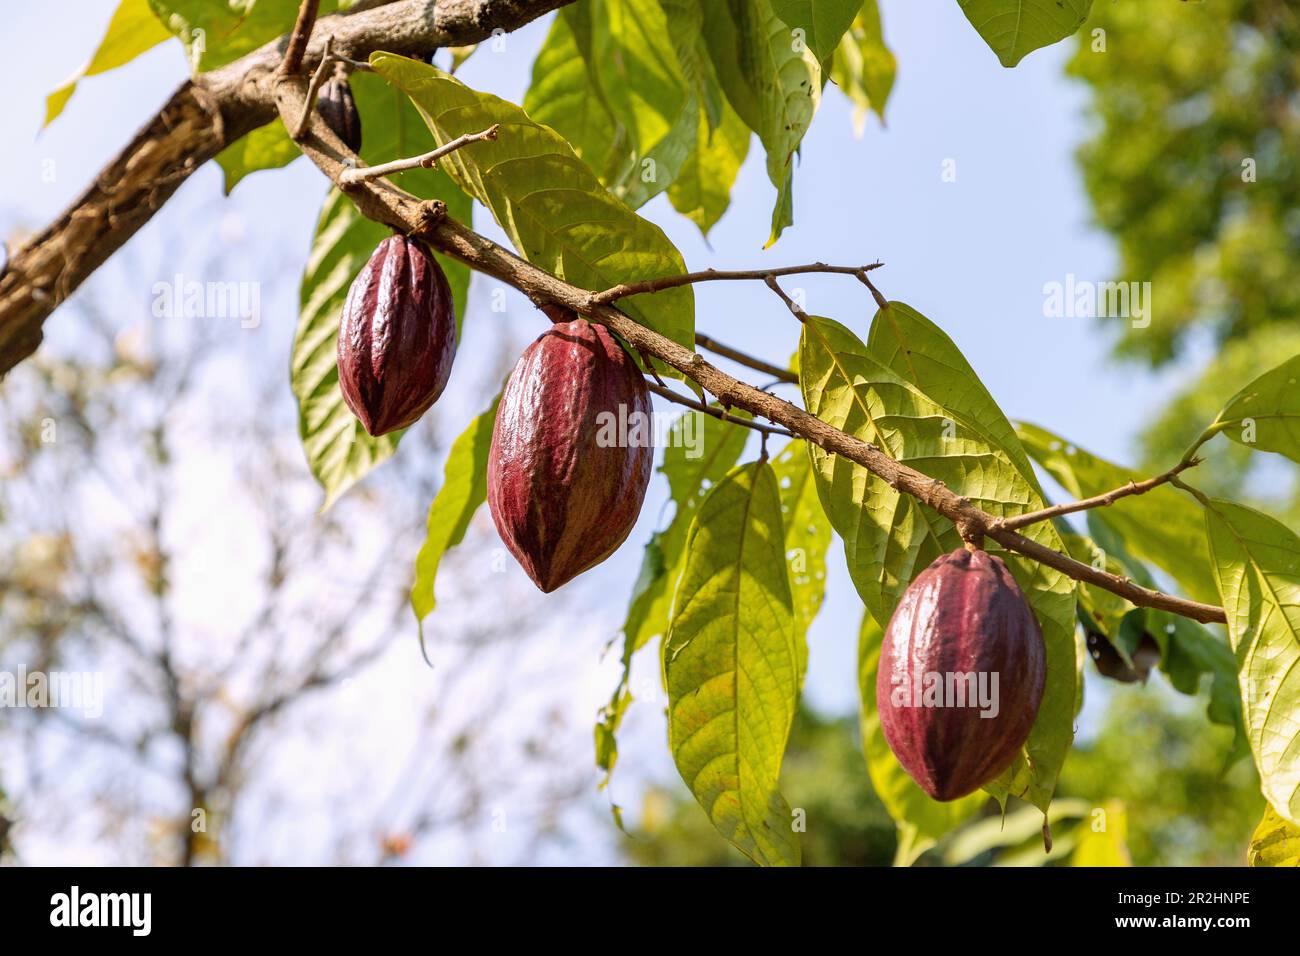 Cacao tree, Theobroma cacao, with fruit on São Tomé island in West Africa Stock Photo